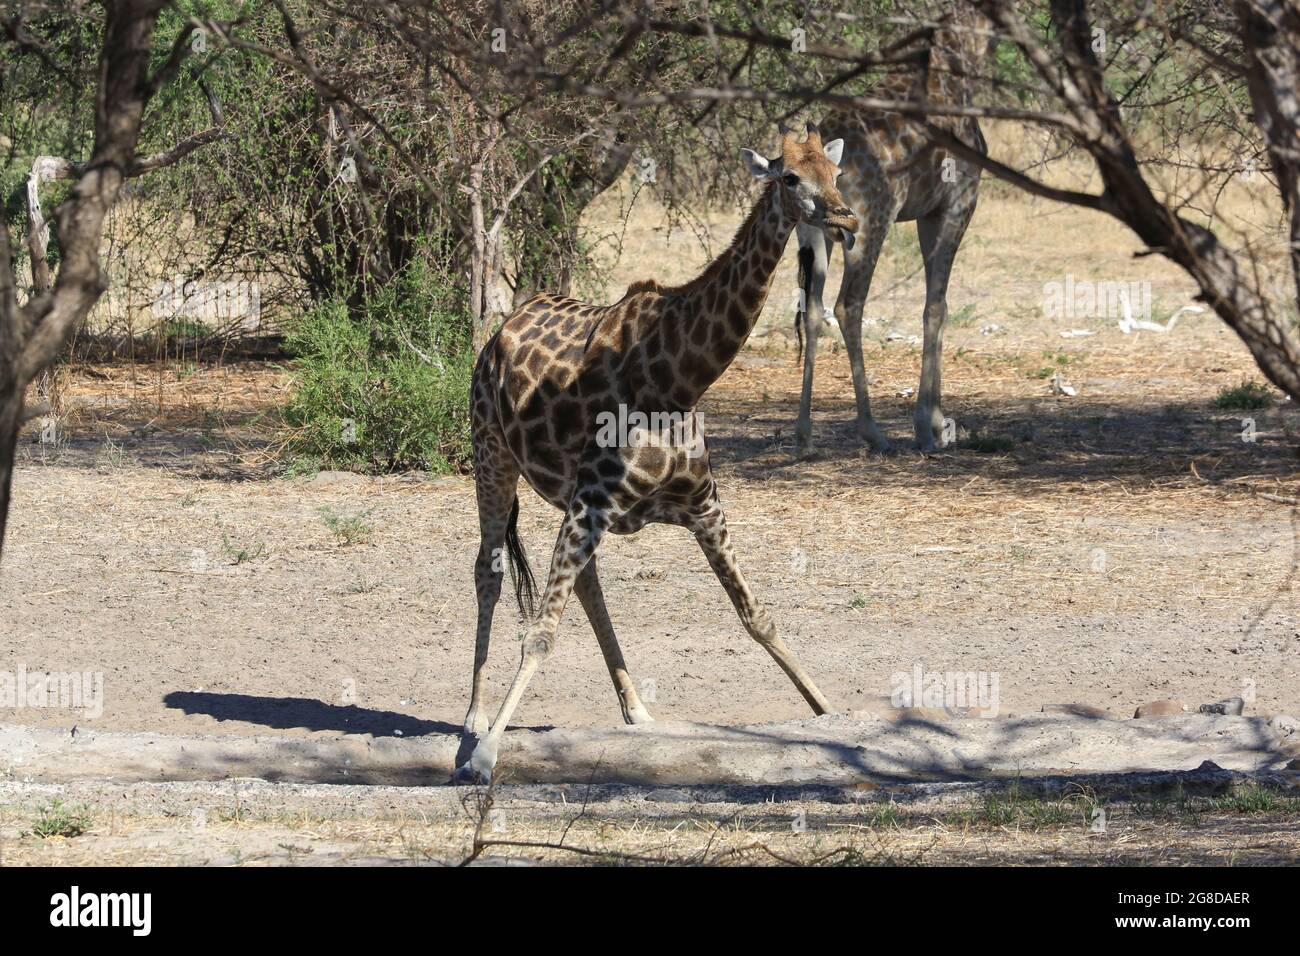 A giraffe about to drink at a water hole on the grounds of Deception Valley Lodge in the Kalahari Desert within Botswana. Stock Photo